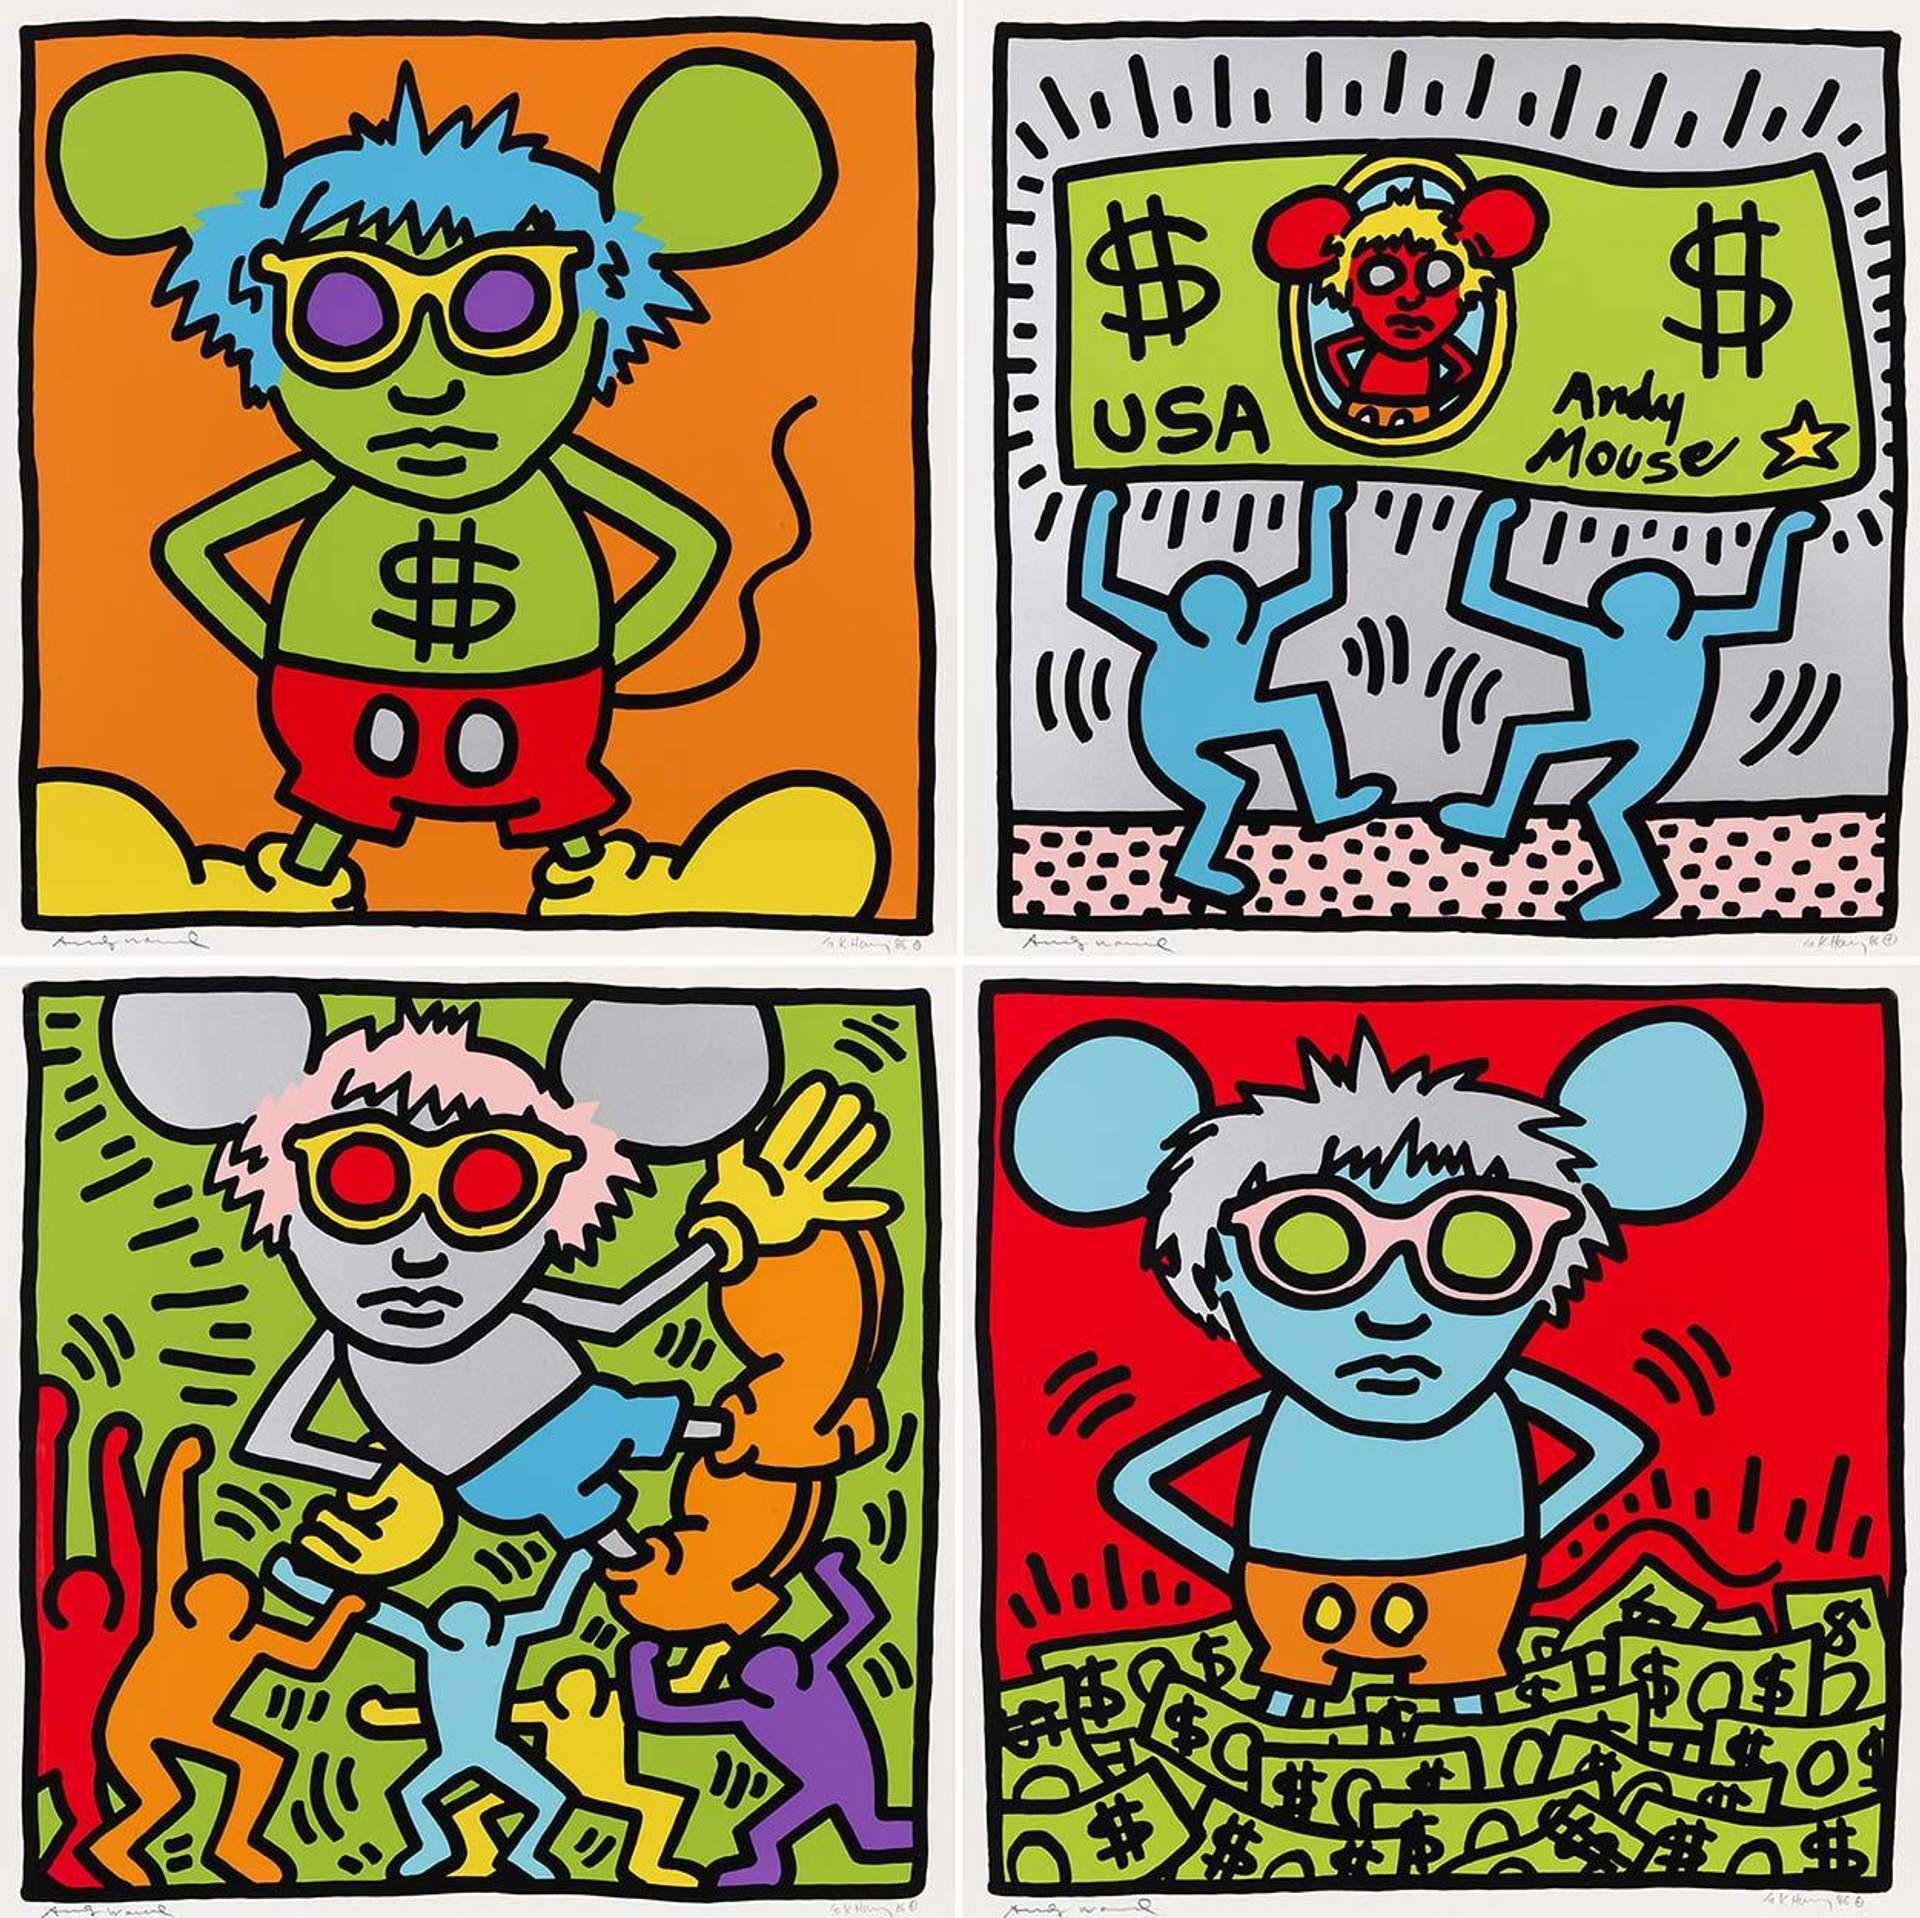 Andy Mouse (complete set) by Keith Haring - MyArtBroker